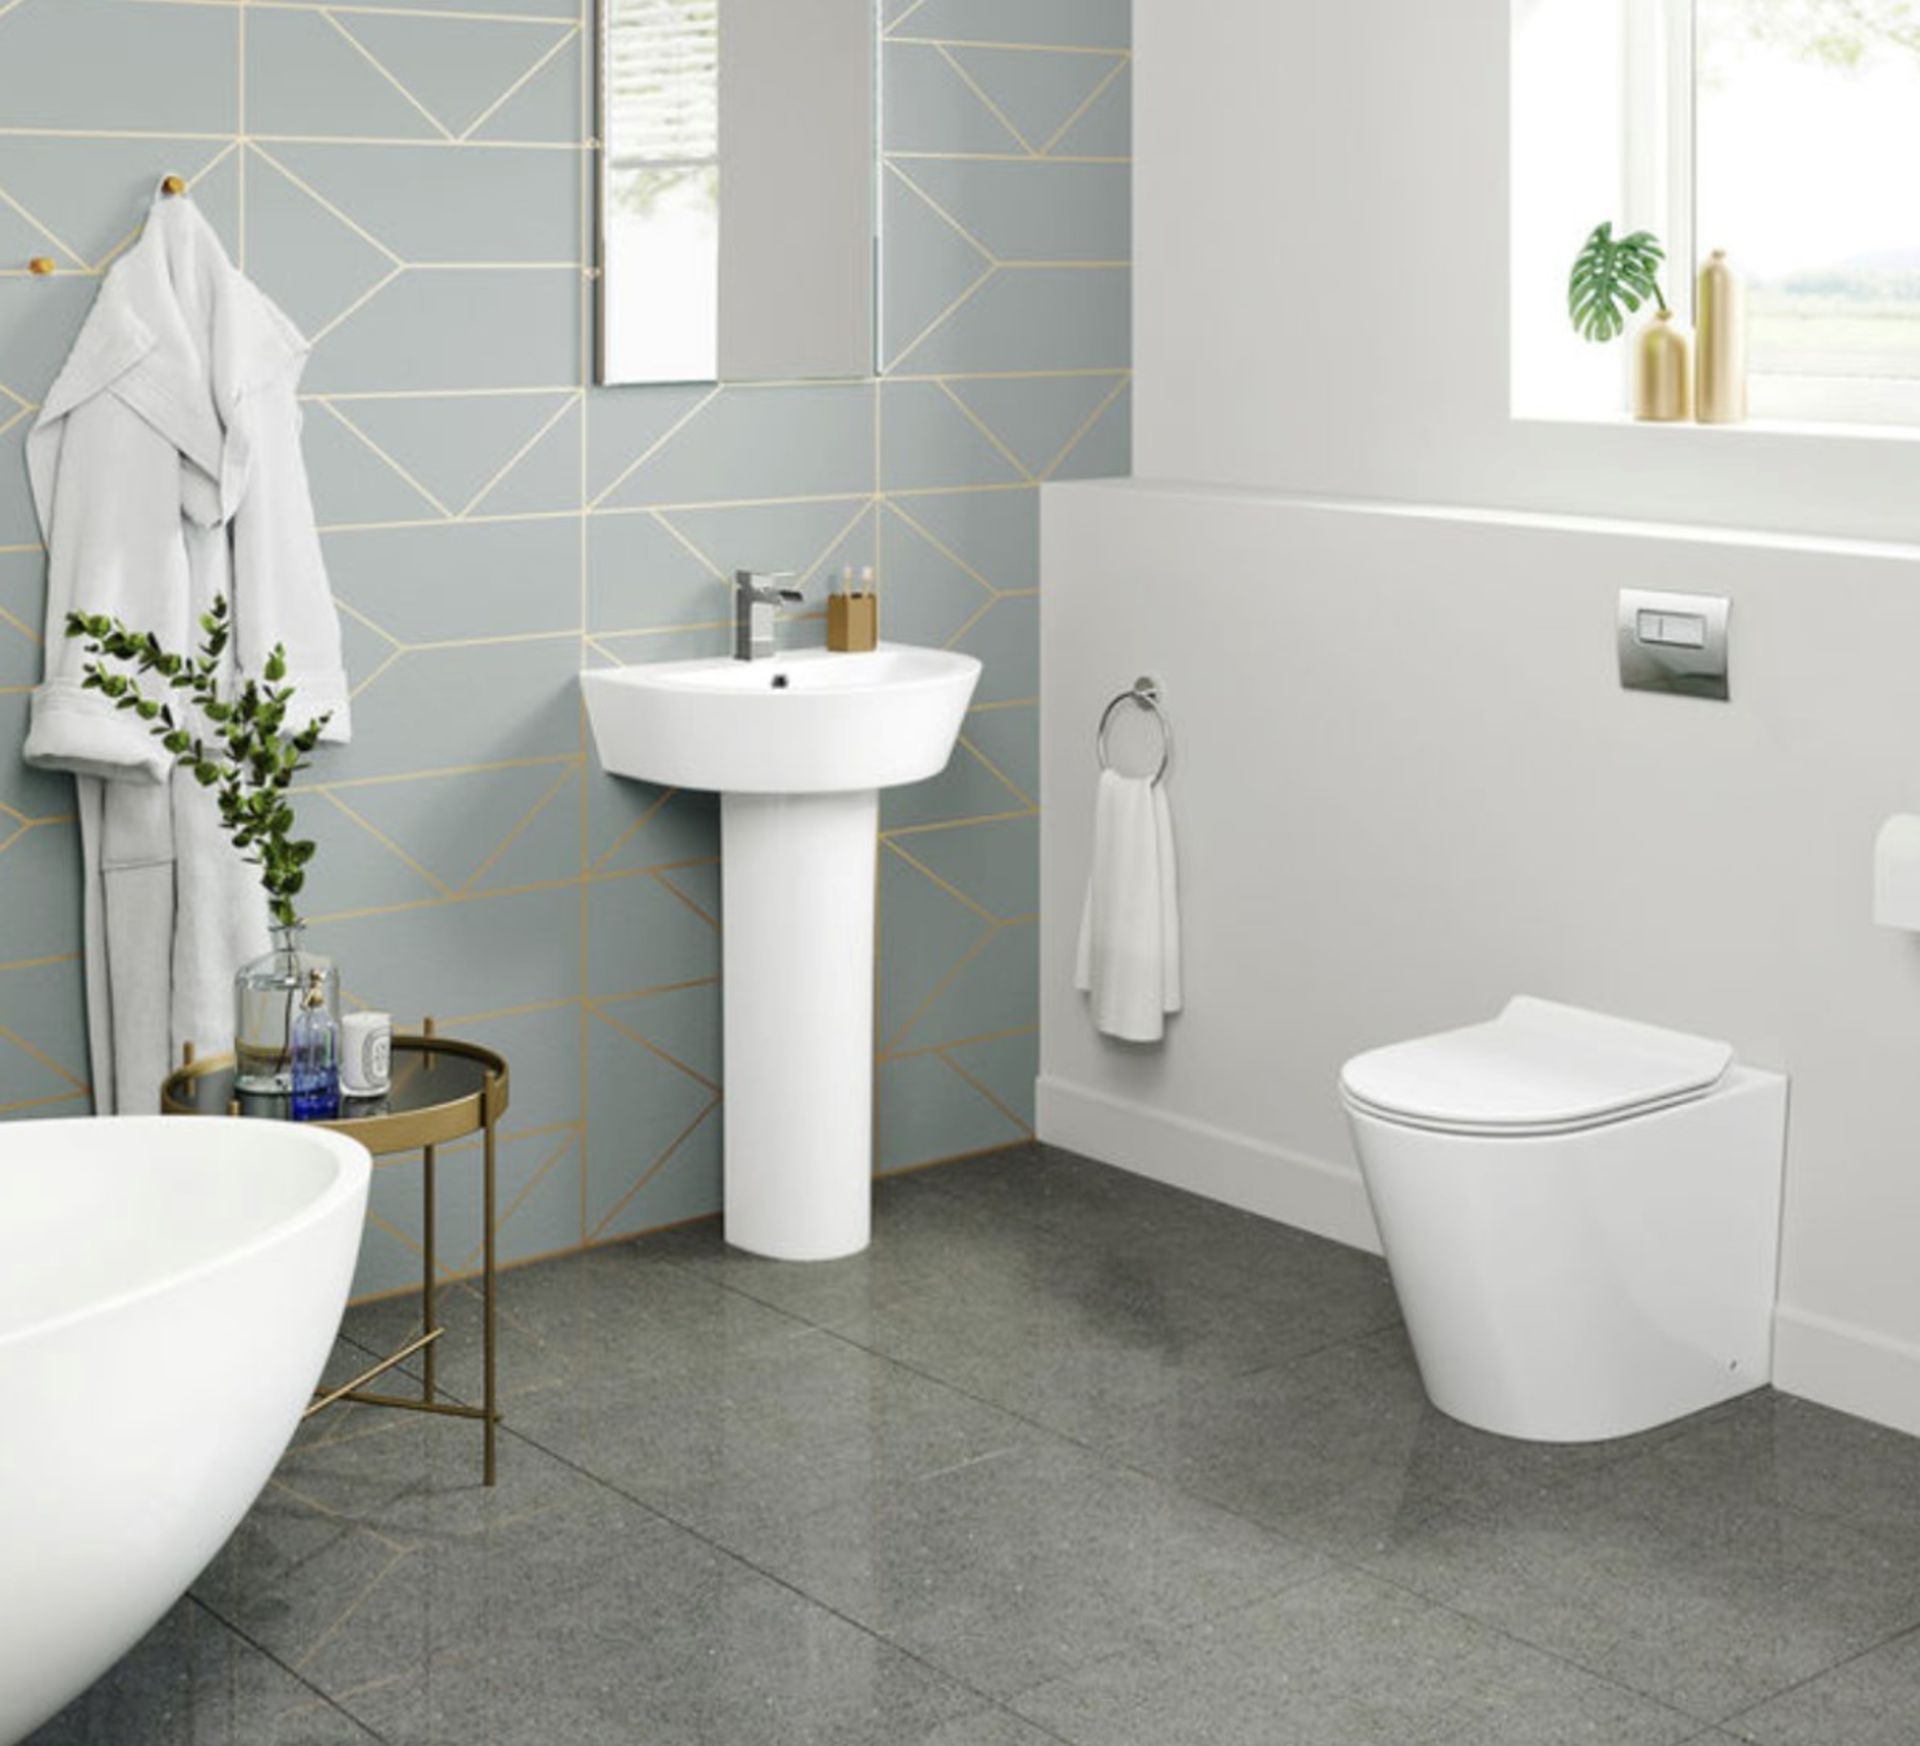 NEW & BOXED Lyon Back To Wall Toilet with Slim Soft Close Seat. RRP £349.99 Our Lyon back to ... - Image 2 of 2